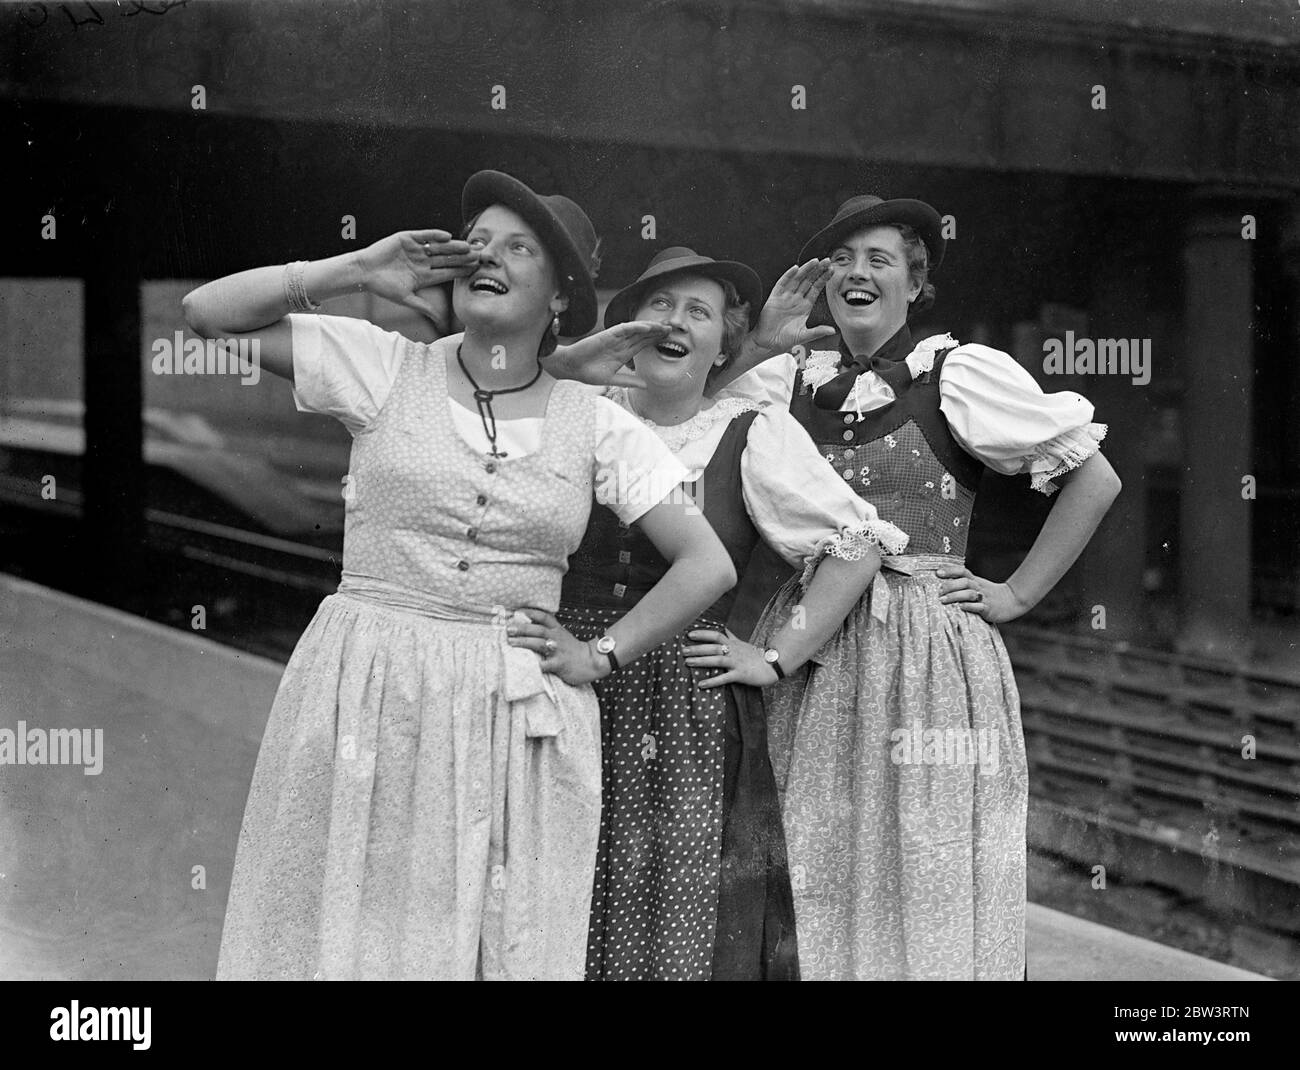 Yodelling High Resolution Stock Photography and Images - Alamy